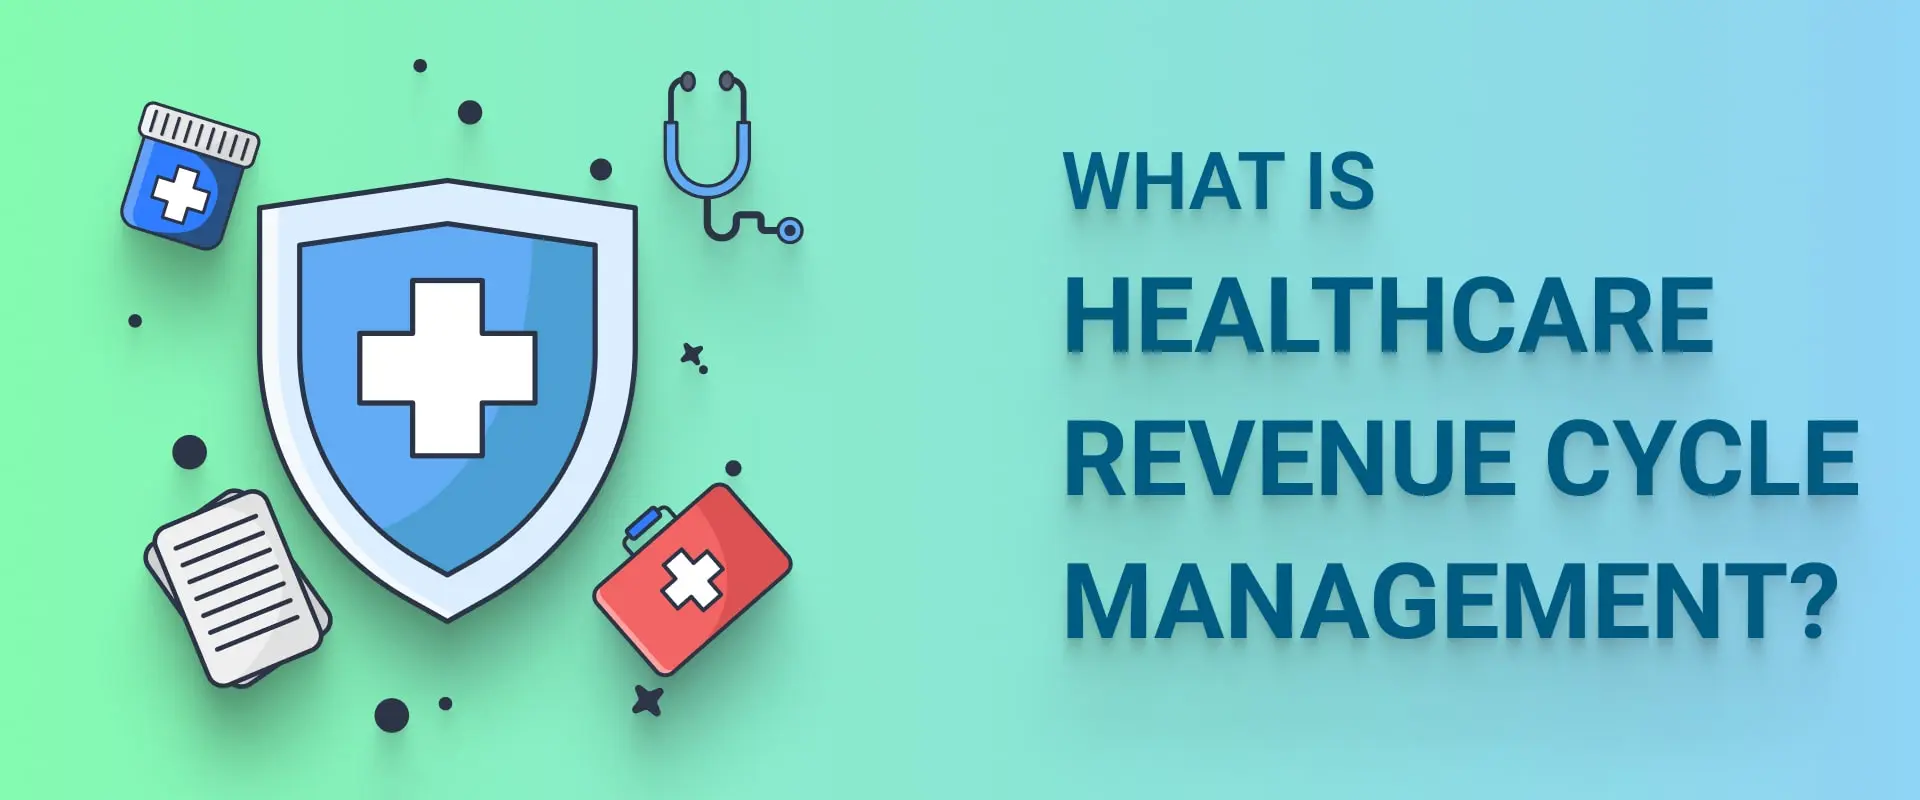 What is healthcare Revenue Cycle Management